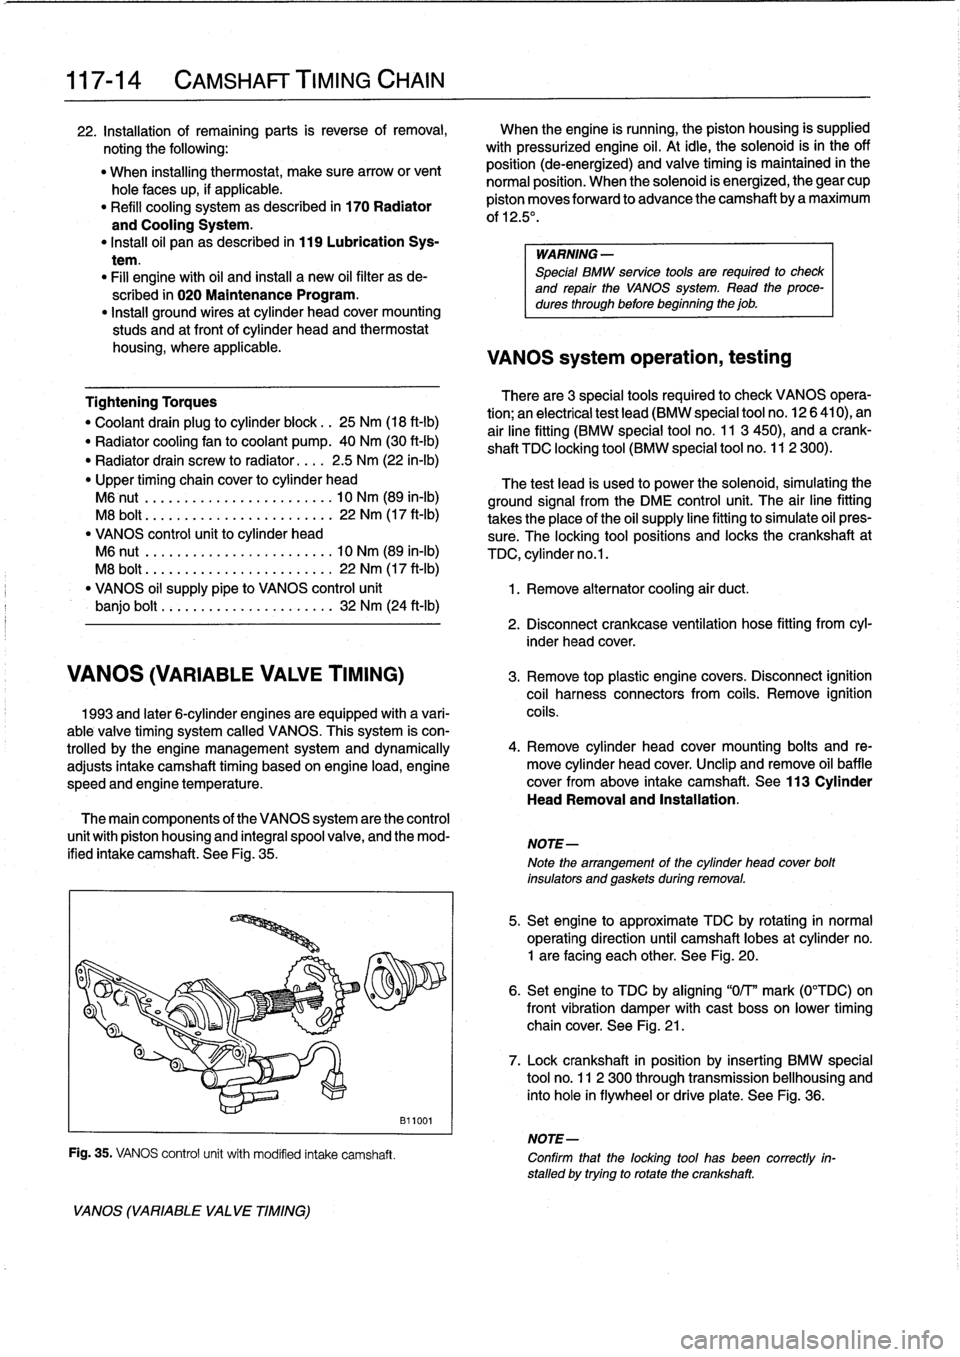 BMW 323i 1993 E36 Workshop Manual 
117-
1
4

	

CAMSHAFT
TIMING
CHAIN

22
.
Installation
of
remaining
parts
is
reverse
of
removal,

	

When
theengine
is
running,
the
piston
housing
is
supplied

noting
the
following
:

	

with
pressuri